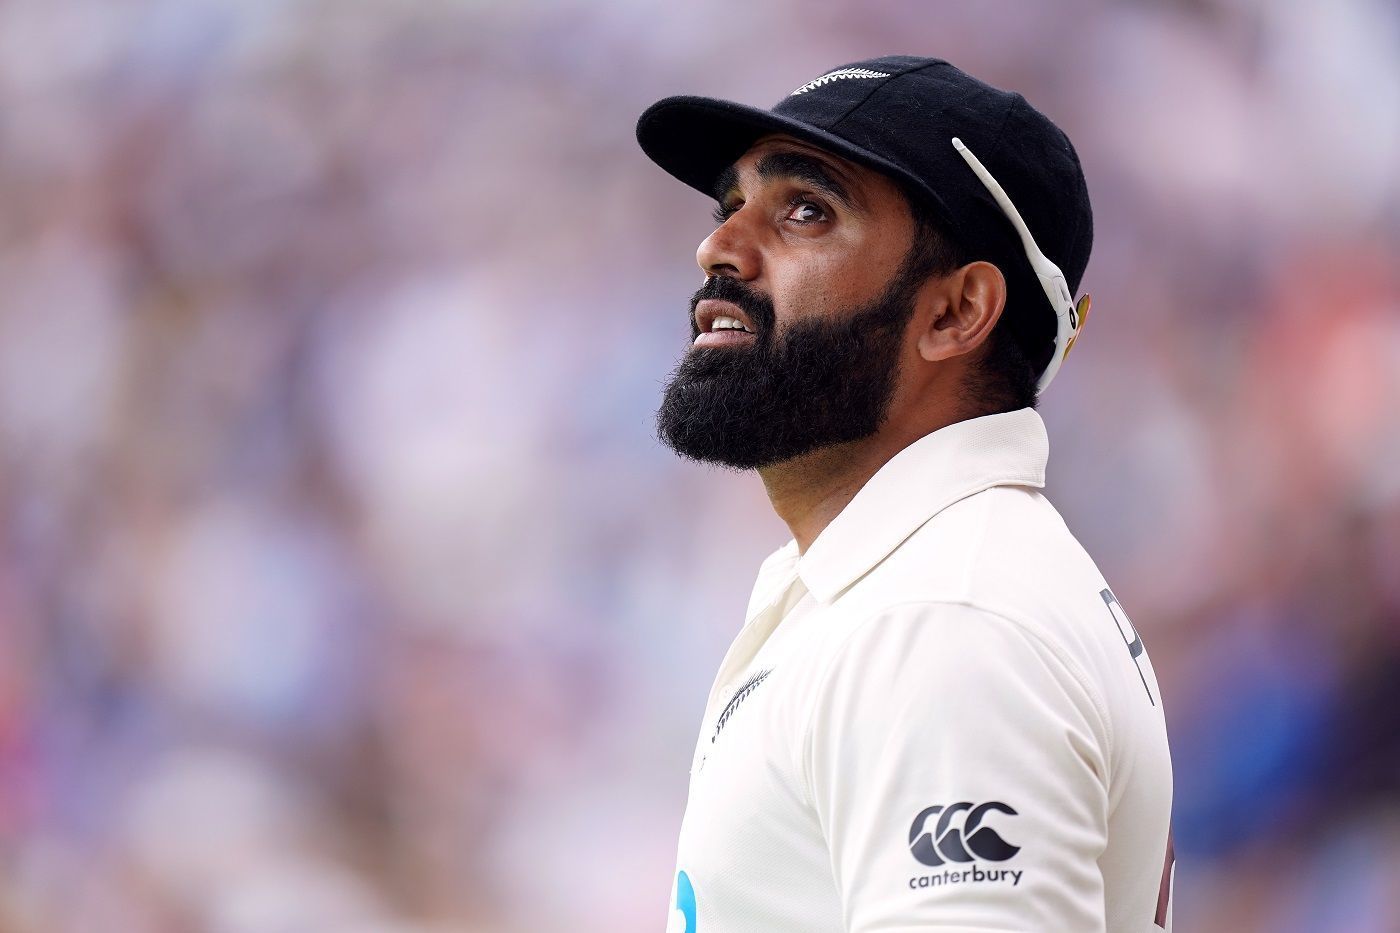 Ajaz Patel, the lead New Zealand spinner, was hardly consistent with his lengths against India.